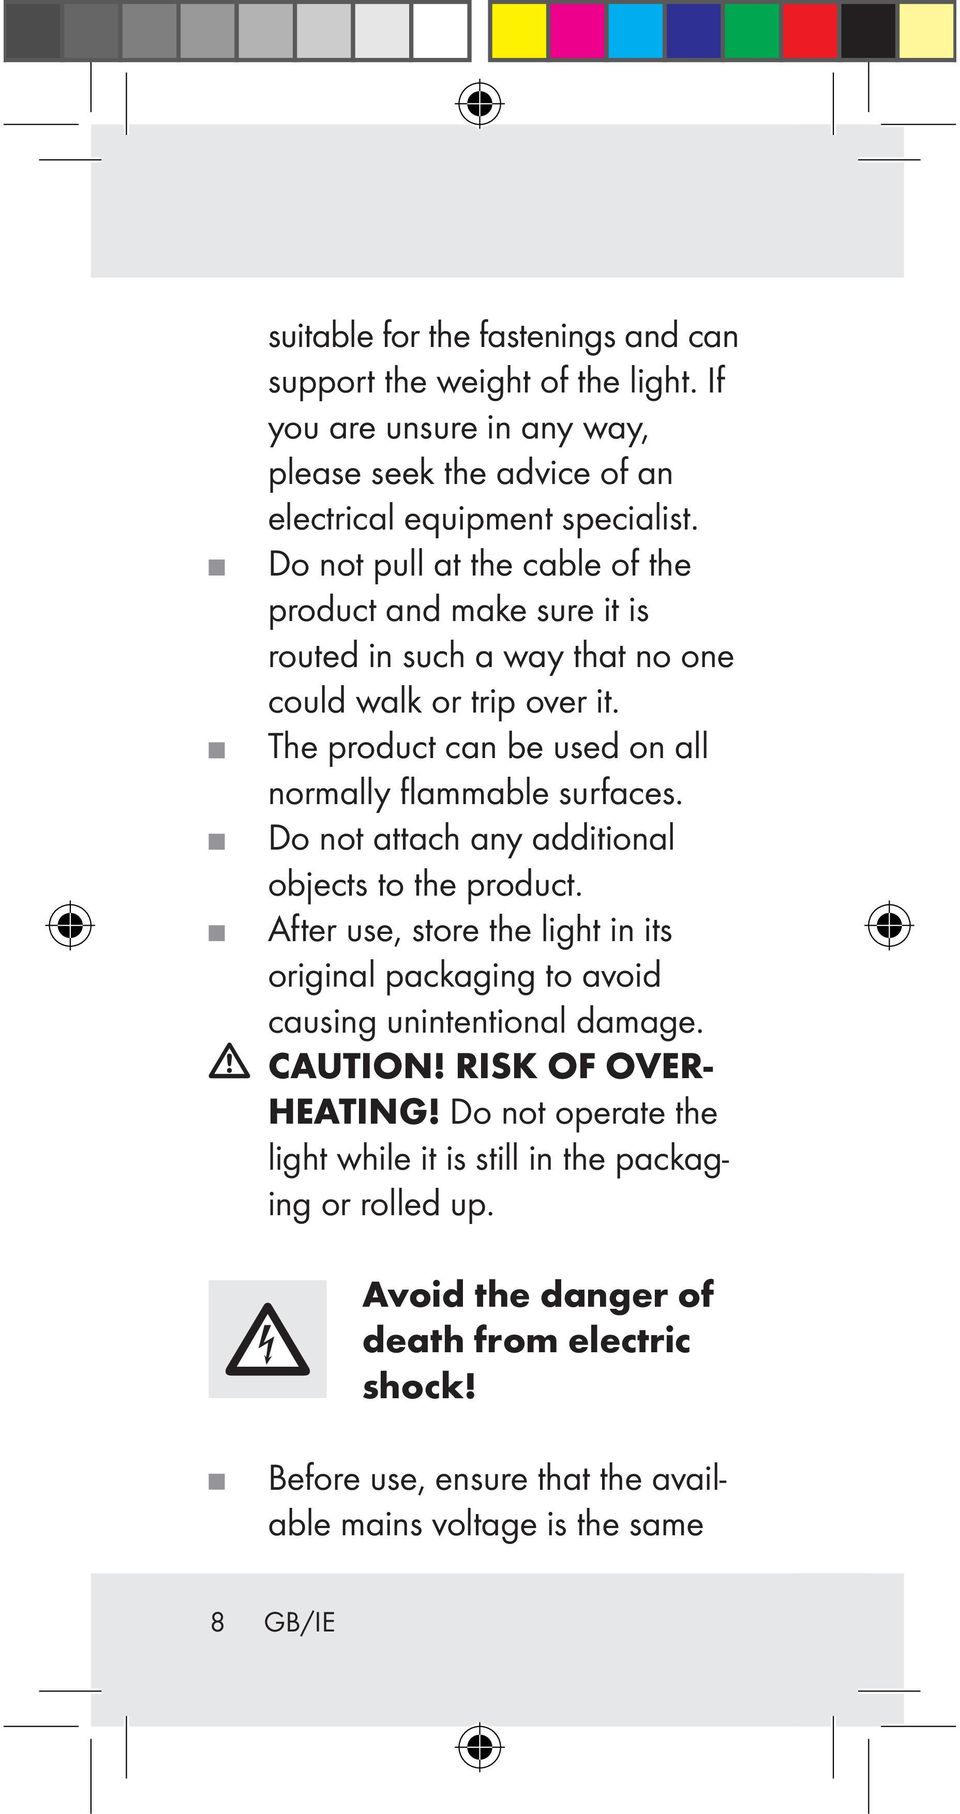 The product can be used on all normally flammable surfaces. Do not attach any additional objects to the product.